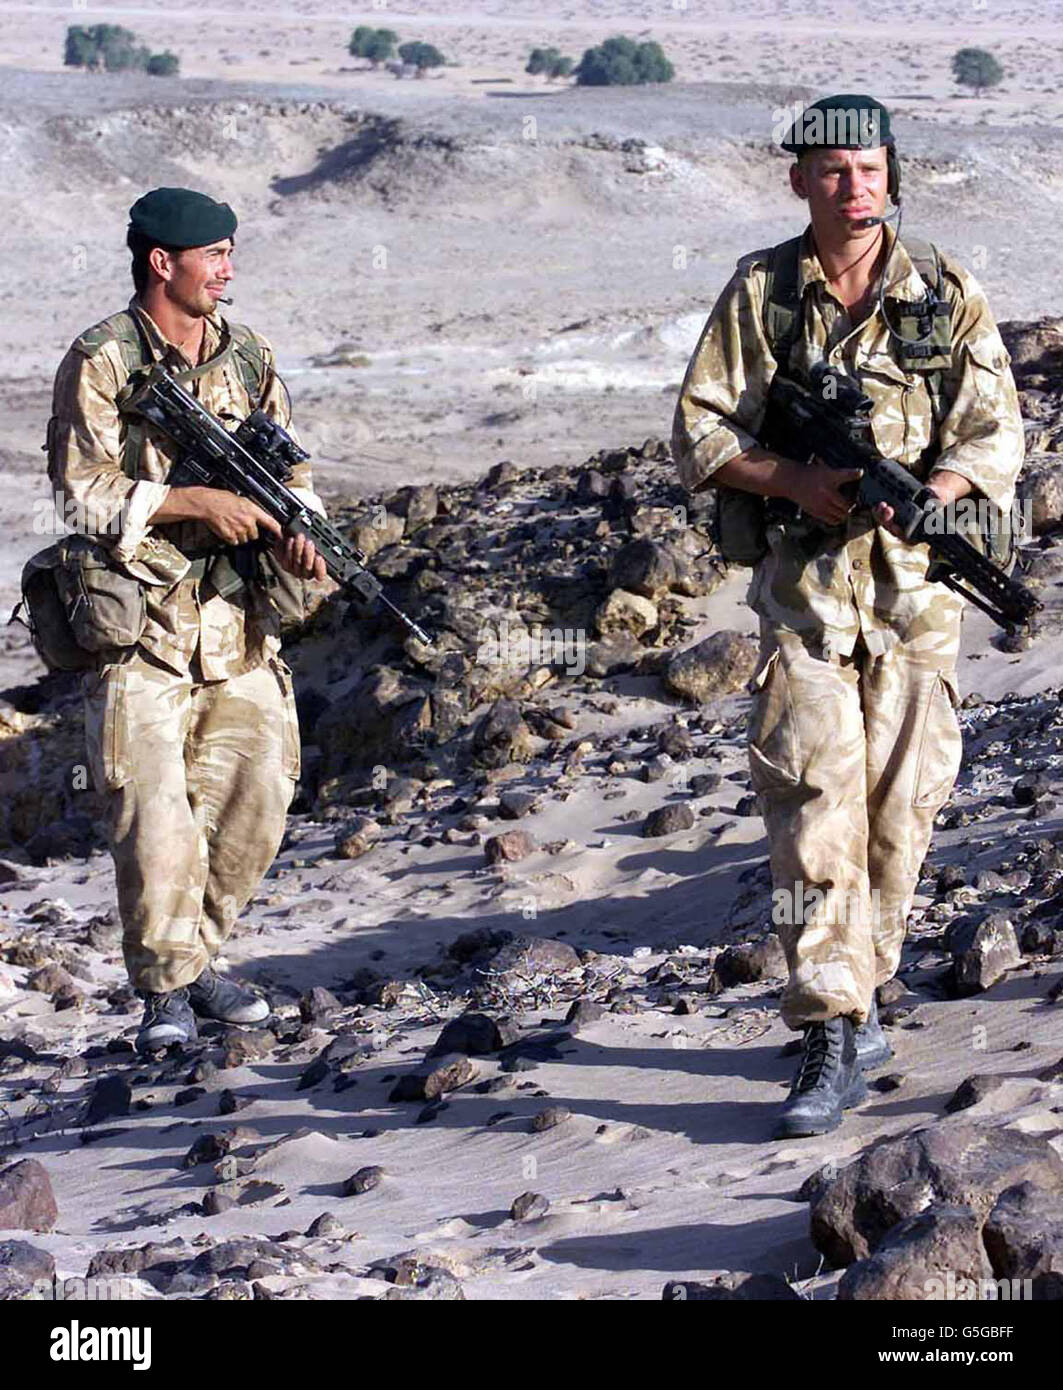 Royal Marines Lance Corporal Jason Evans, 25, from Southampton (left) and Craig Pompey, 19, from Bridgewater from 45 Commando take part in an exercise in the desert of Oman as part of Operation Saif Sareea 2. * British forces are taking part in a number of exercises in the area, although they are not currently involved in the attacks on Afghanistan. 16/04/02: I t has been revealed Tuesday April 16, 2002, that hundreds of Royal Marines have joined American and Afghan soldiers in the first large-scale combat mission in the eastern Afghan mountains since Operation Anaconda. Coalition spokesmen Stock Photo